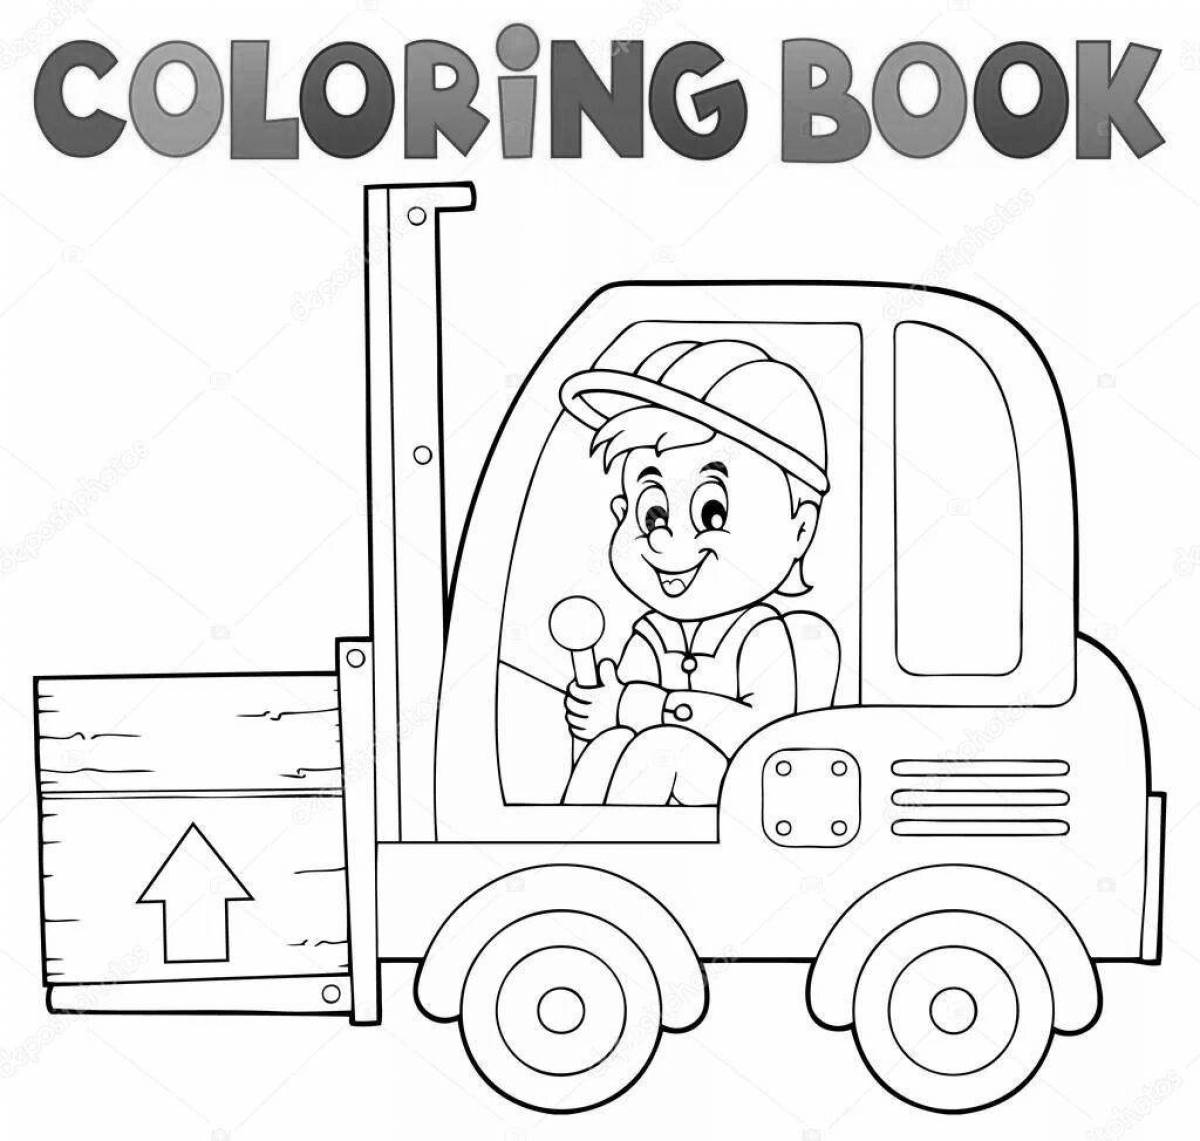 Attractive forklift coloring book